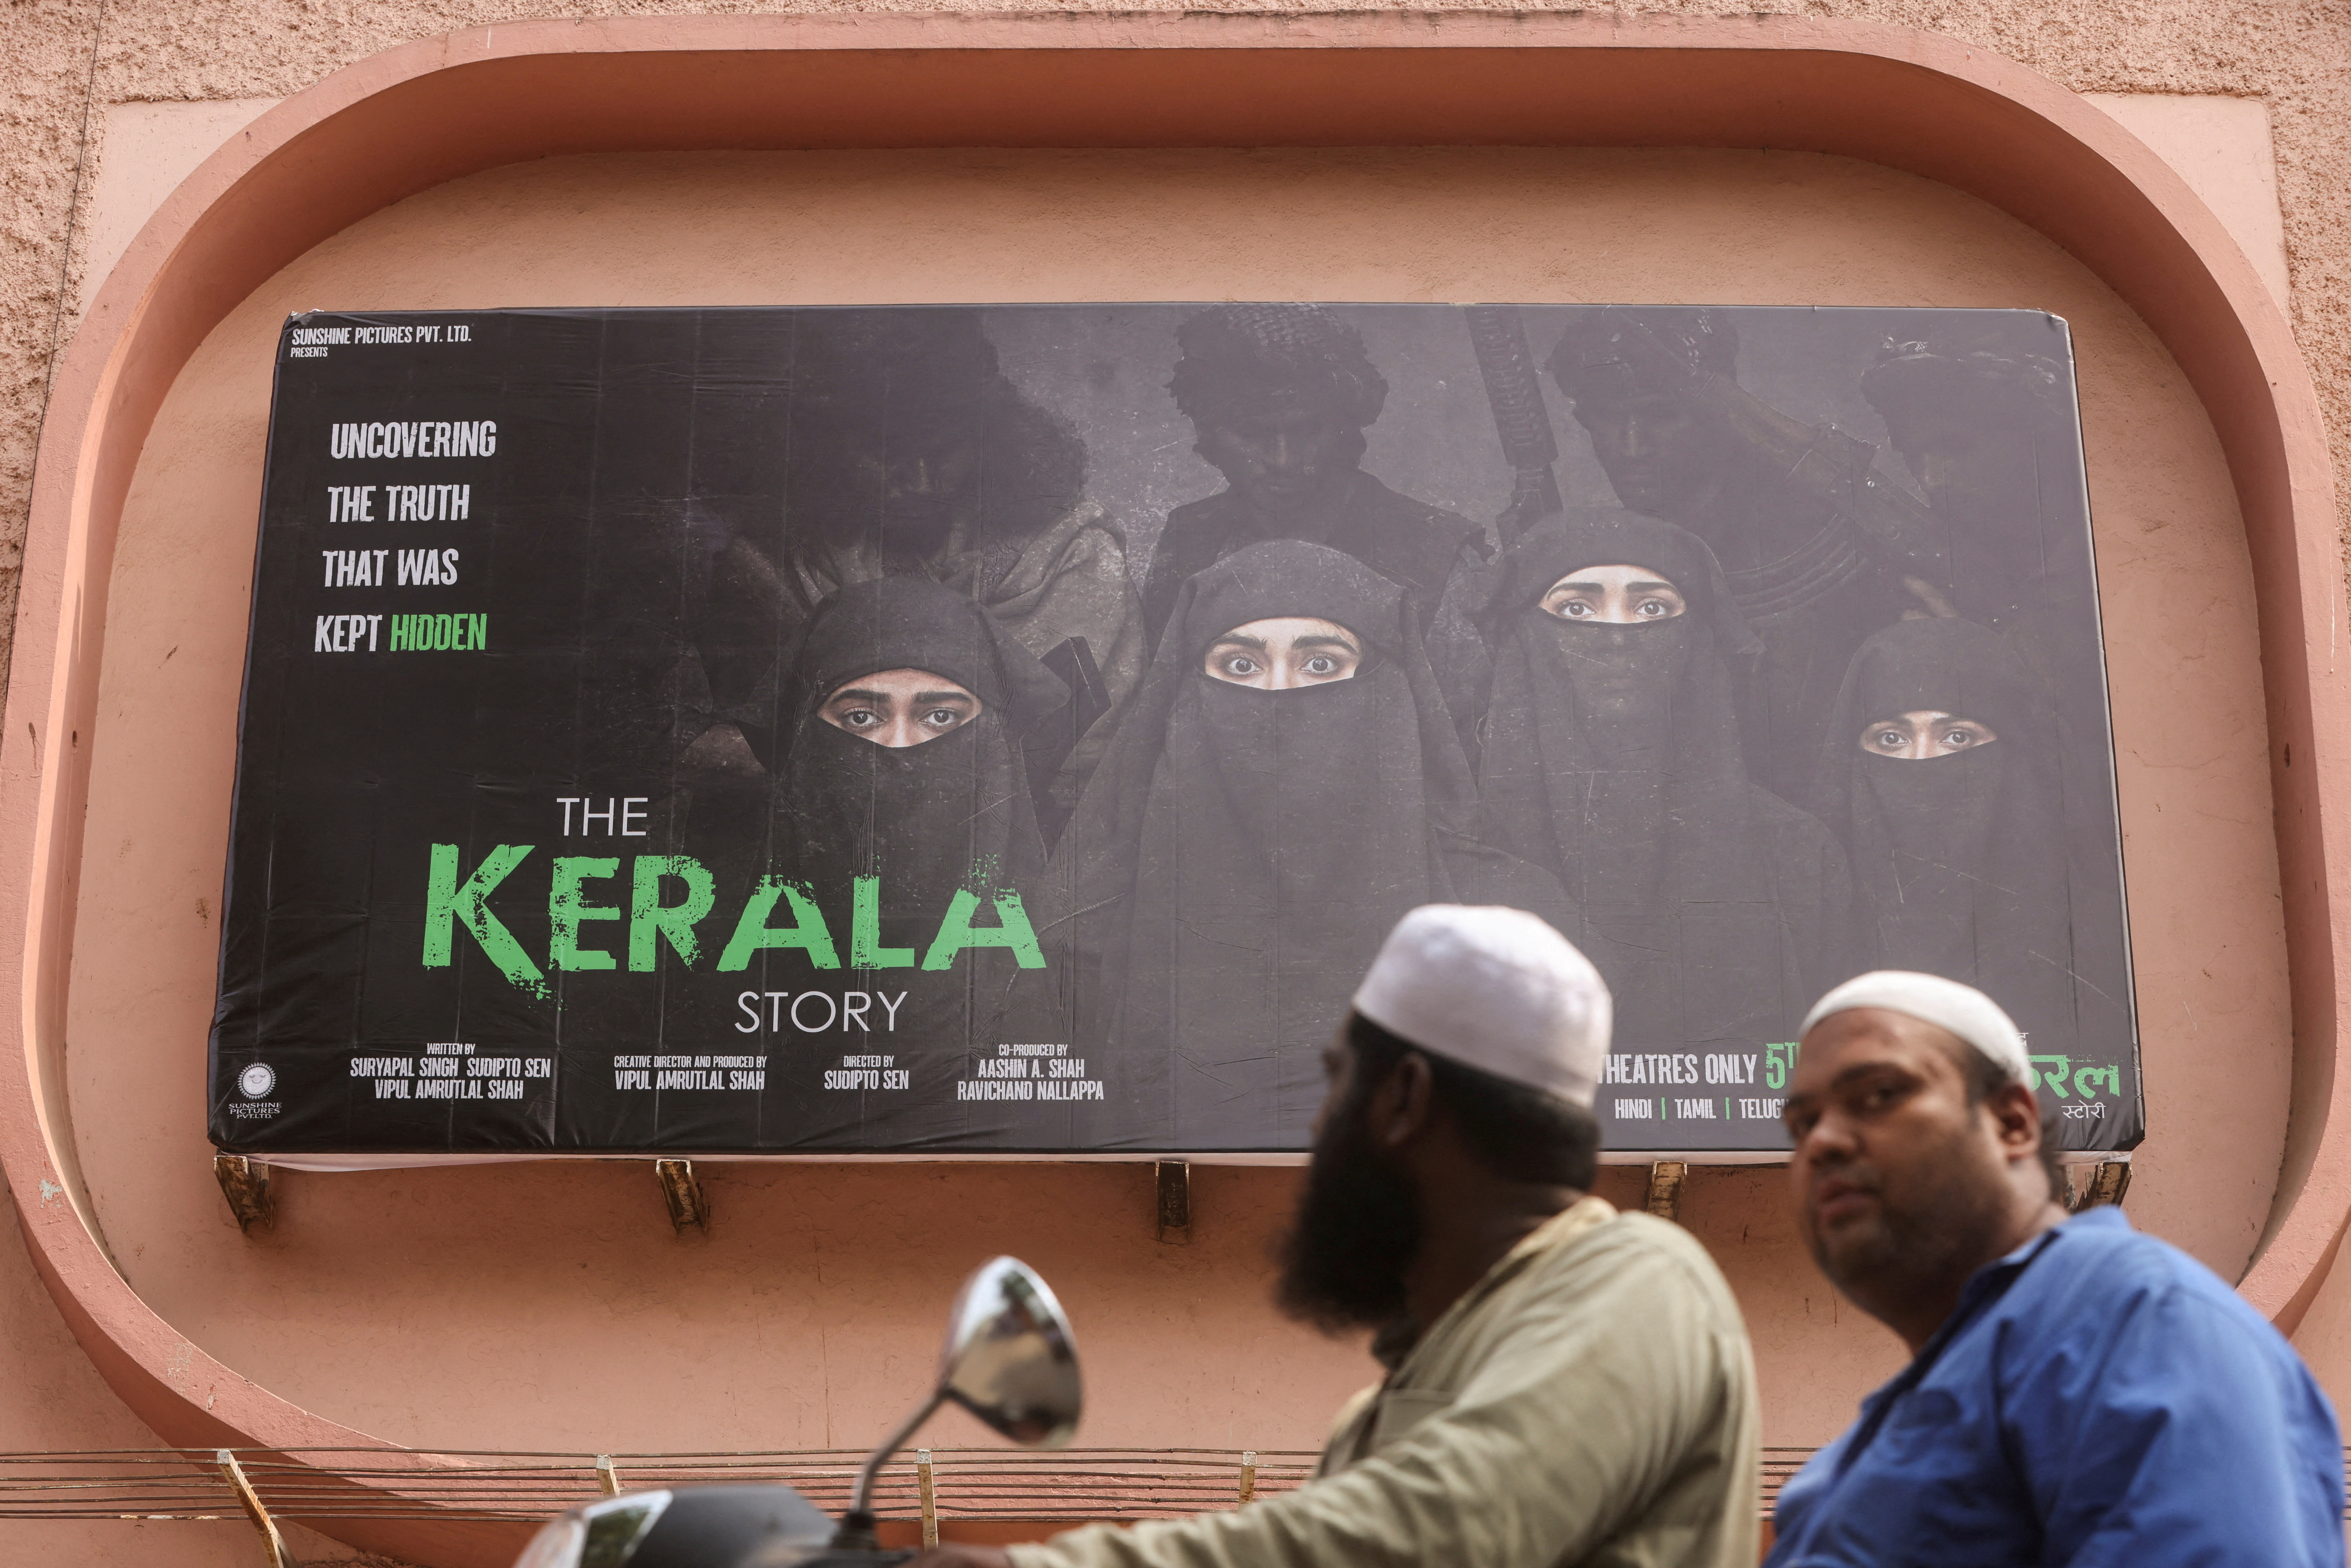 People ride past a poster of a Hindi movie titled "The Kerala Story", outside a cinema in Mumbai